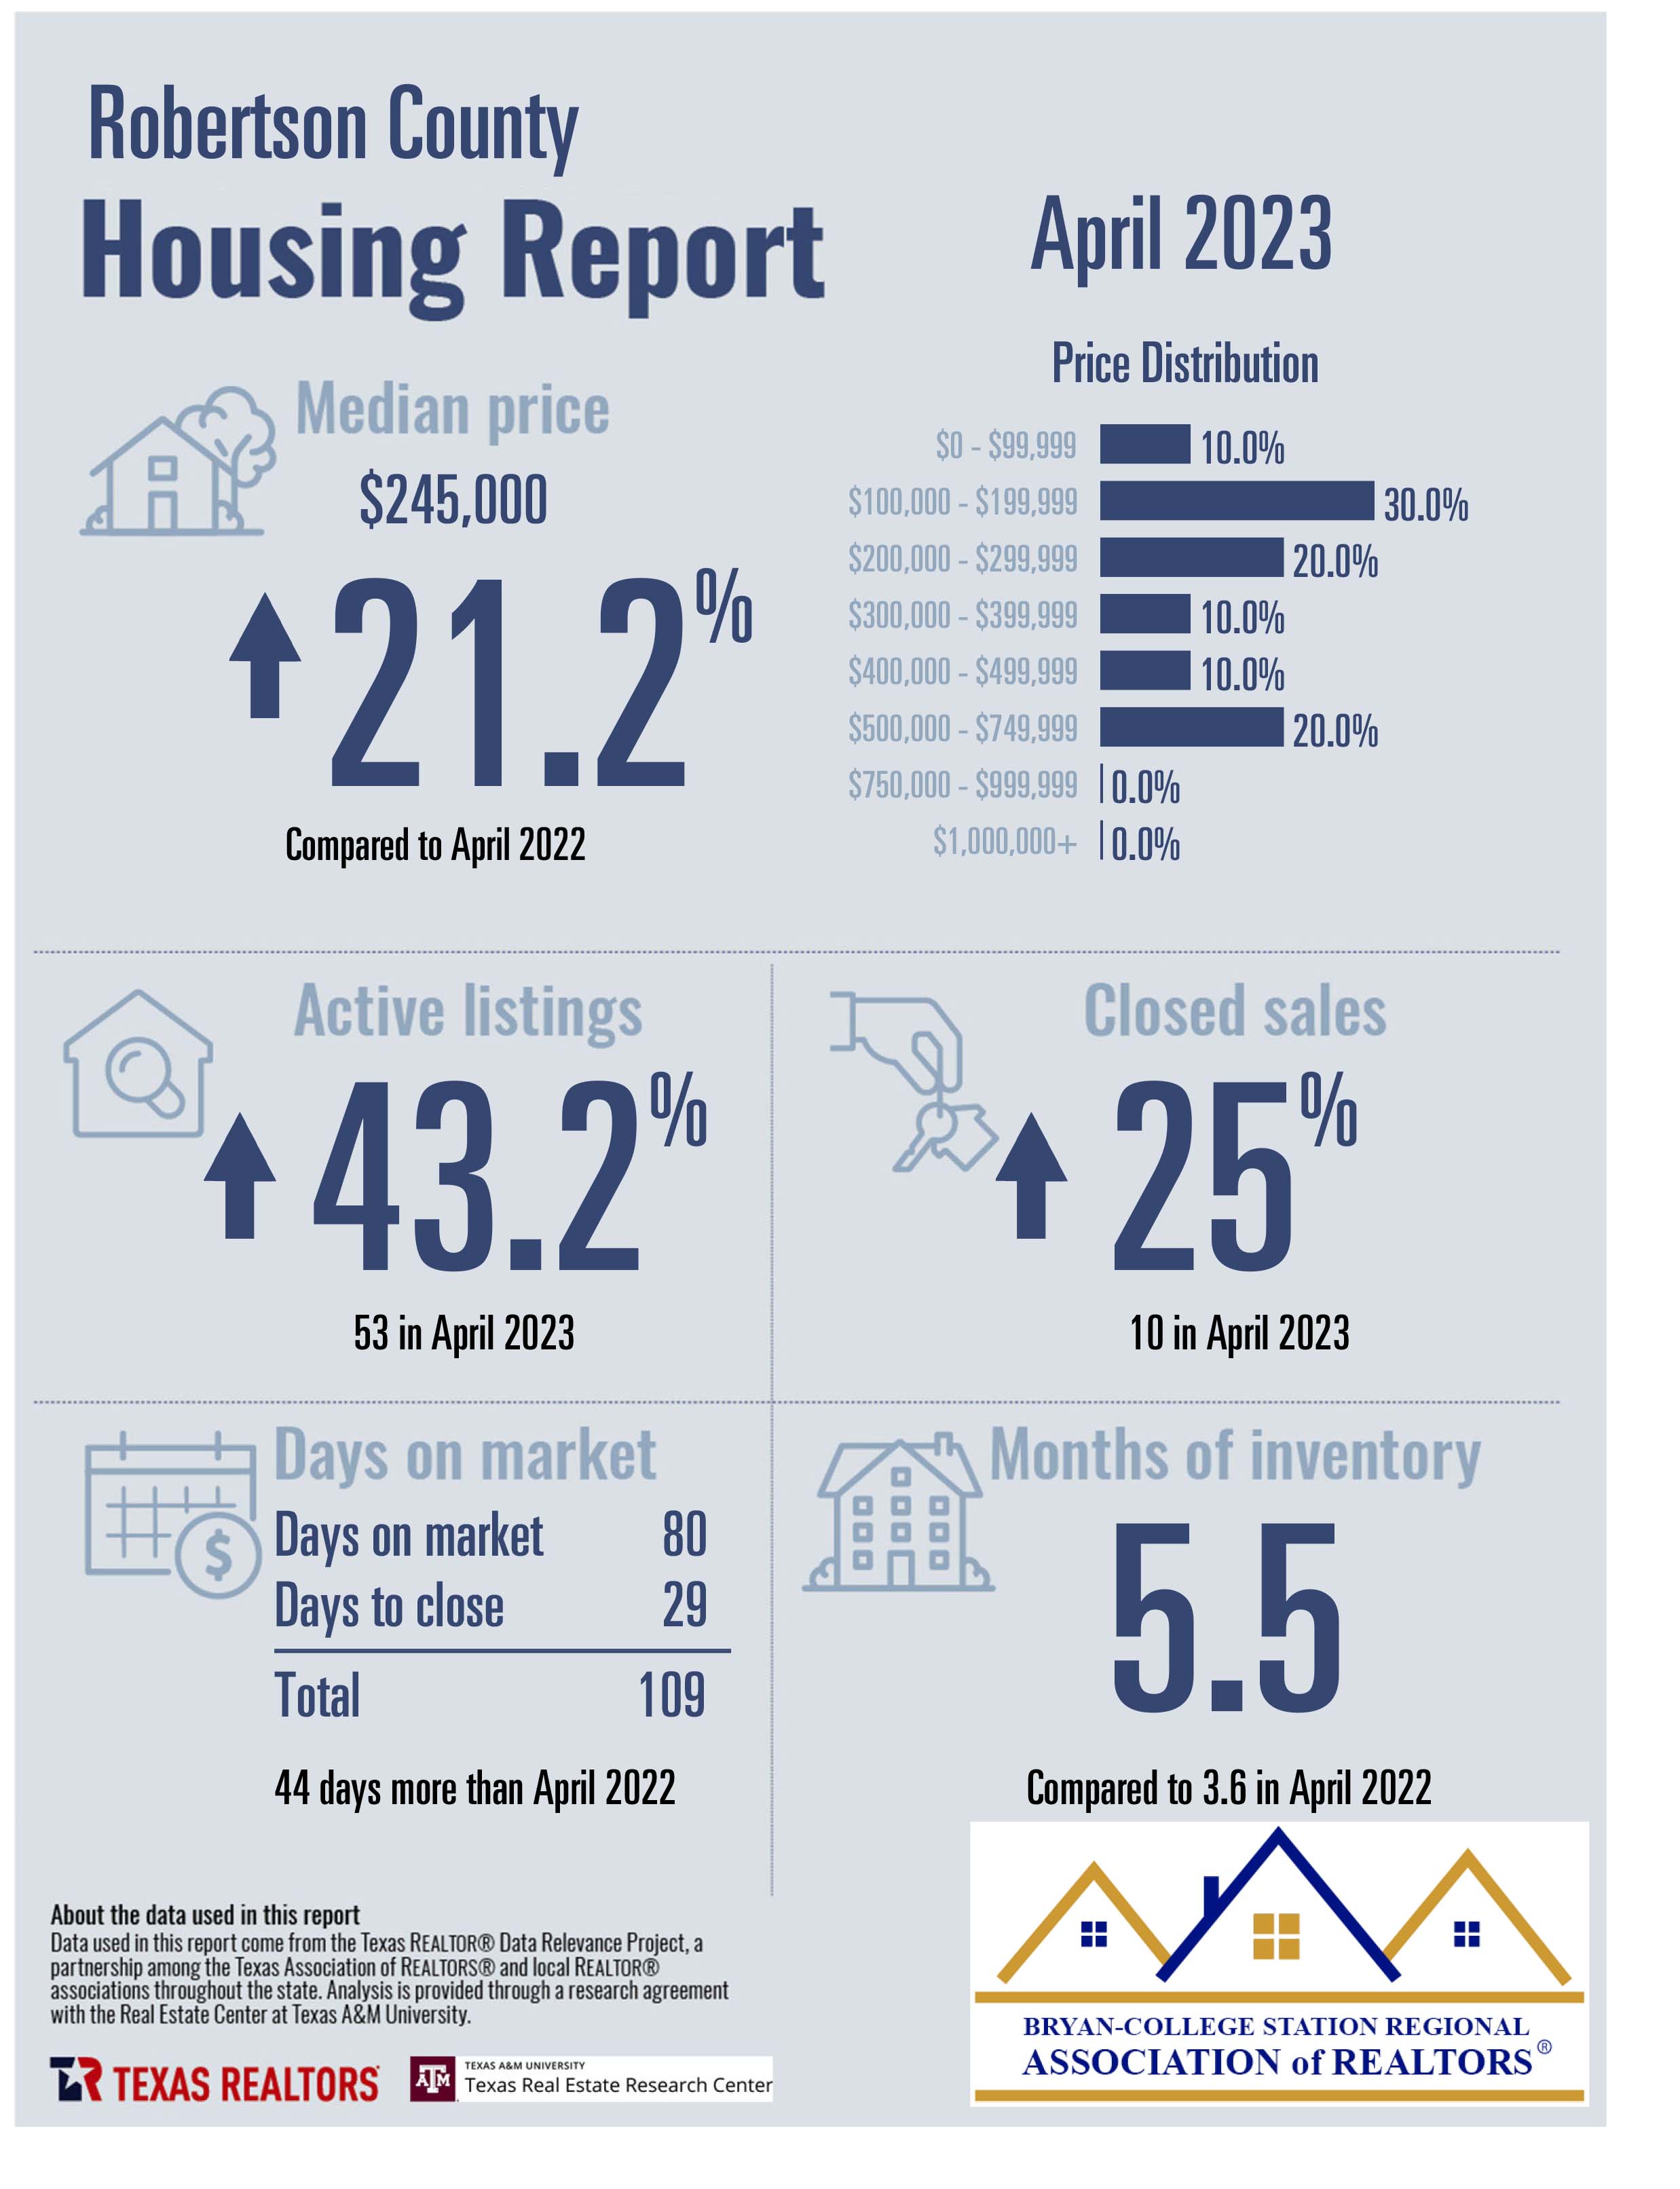 Residential Home Sale Report april 2023 - Robertson